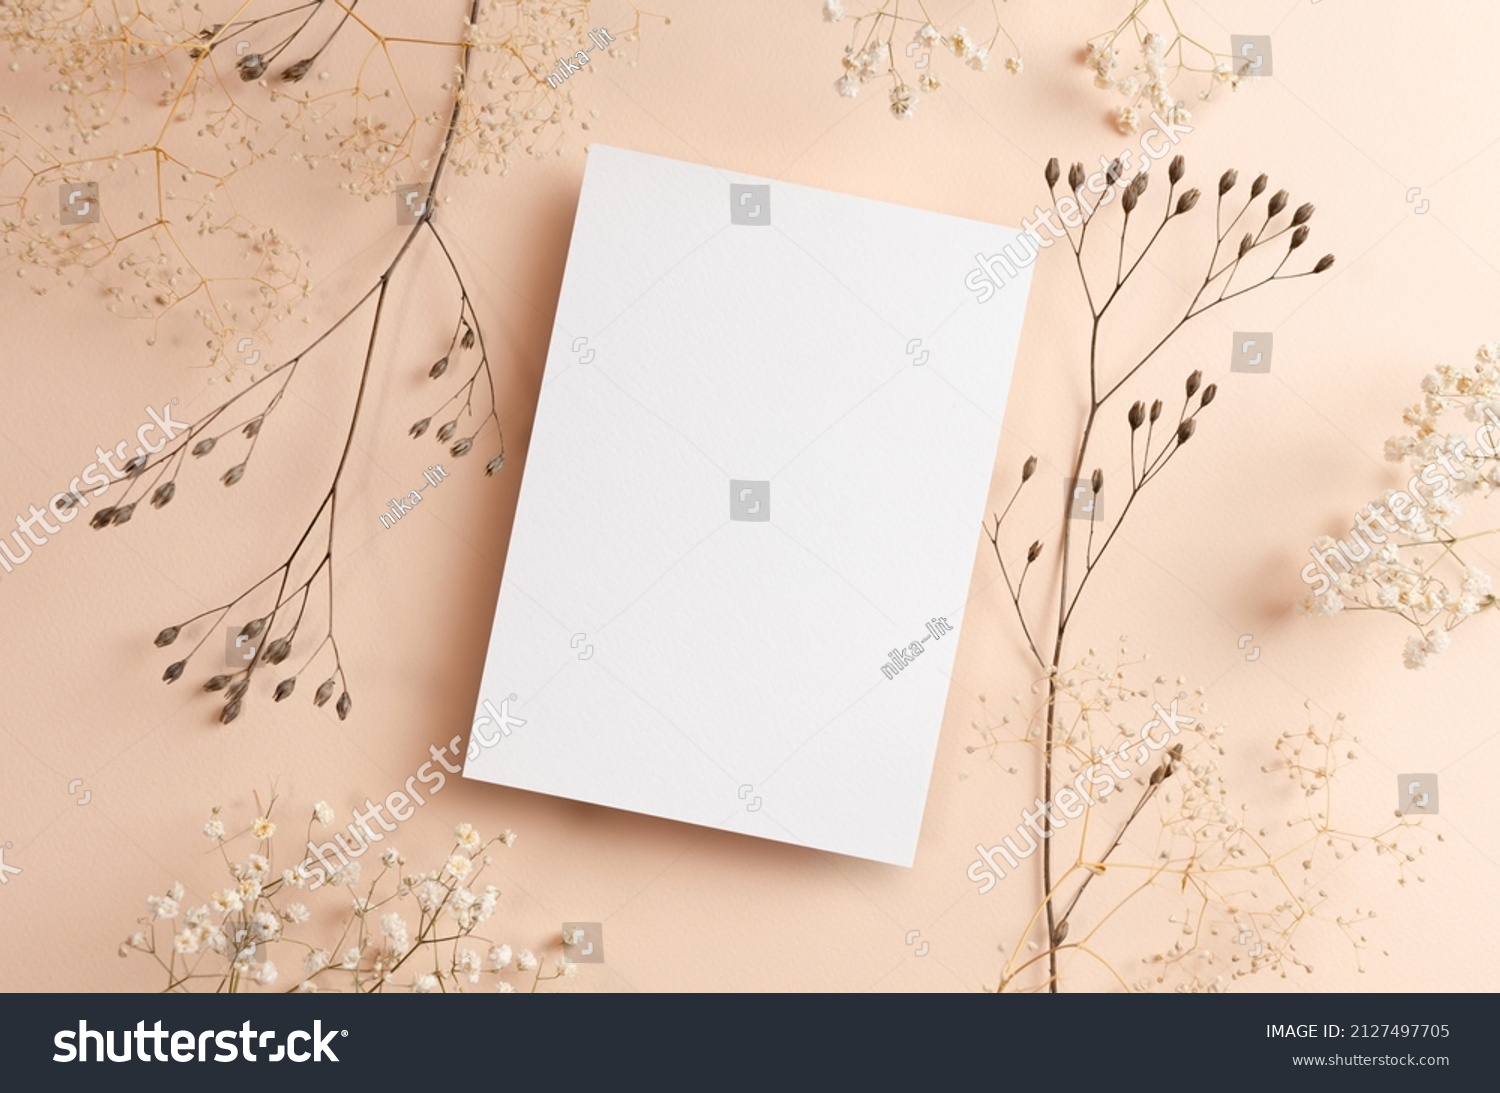 Greeting or invitation card mockup with dry natural plants twigs on beige background #2127497705